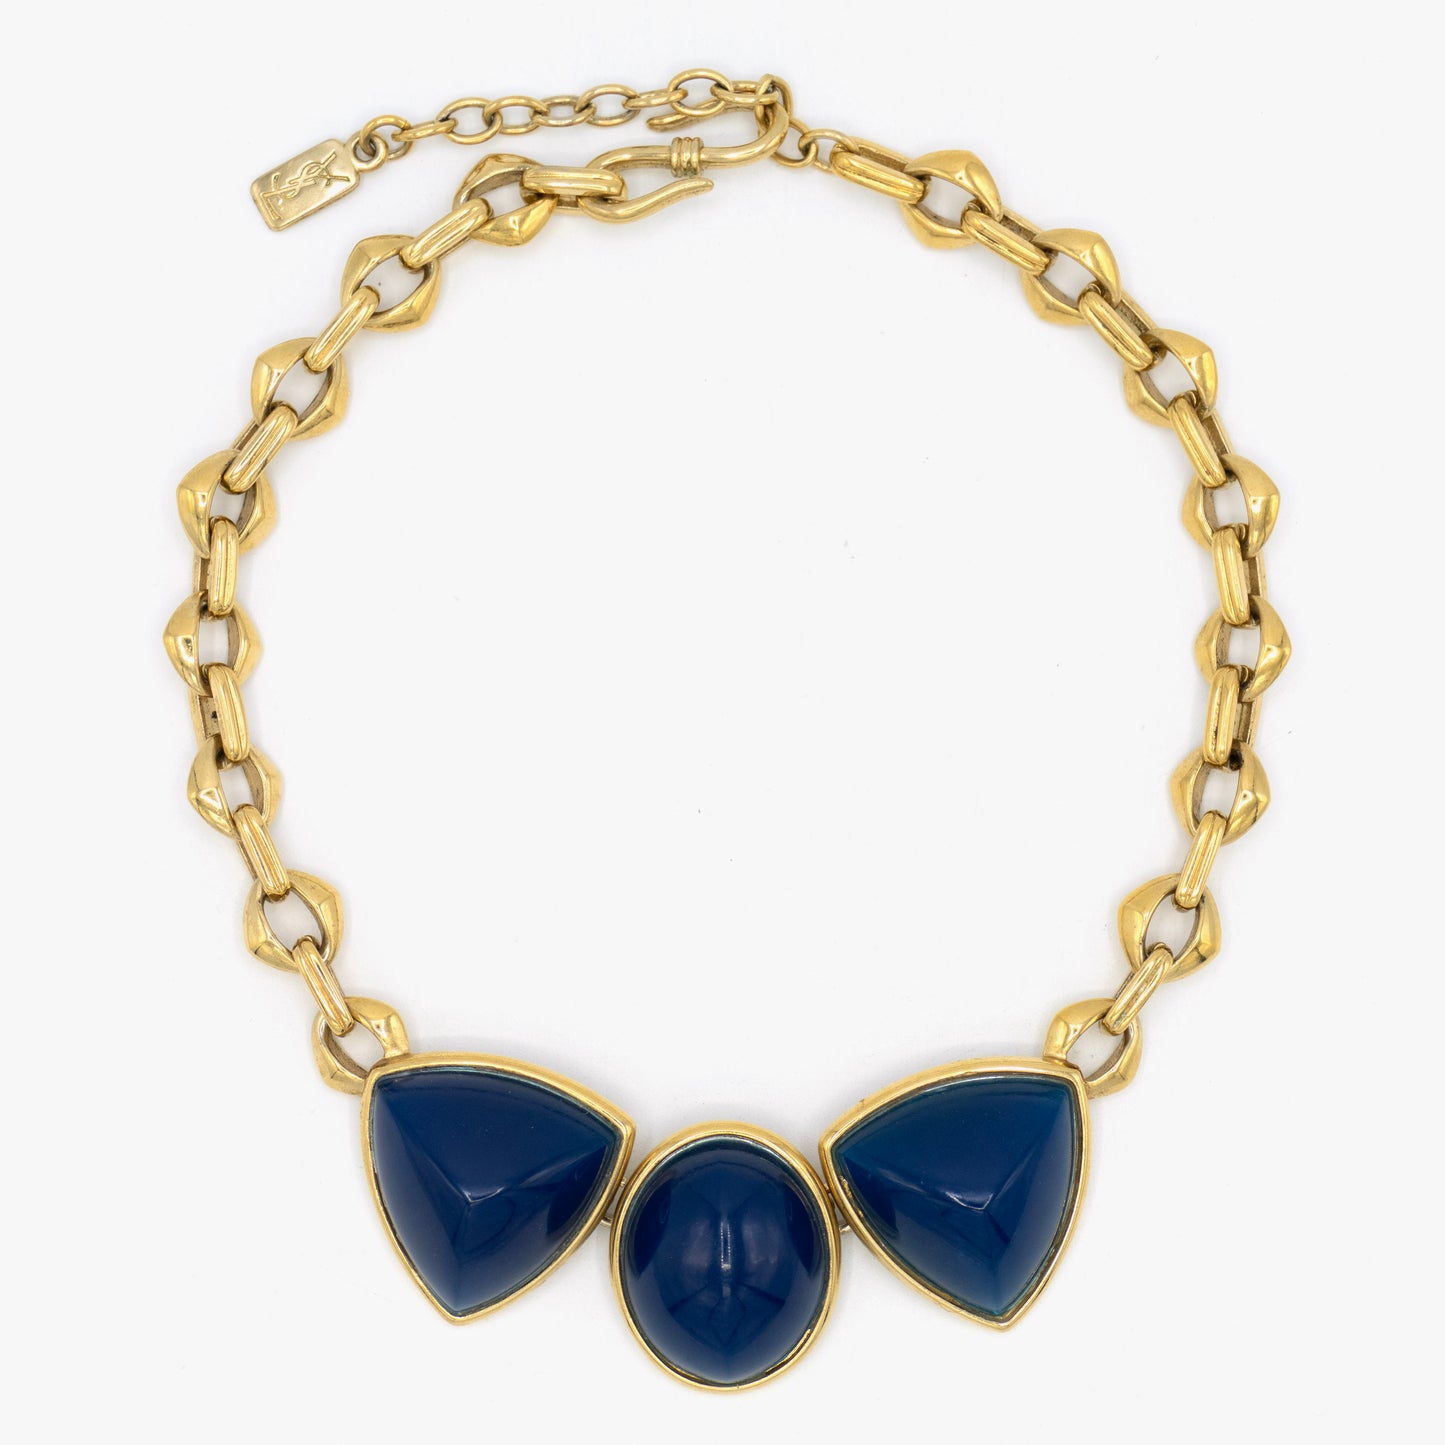 vintage chunky geometric and dimensional blue necklace from 1980's with gold tone chain